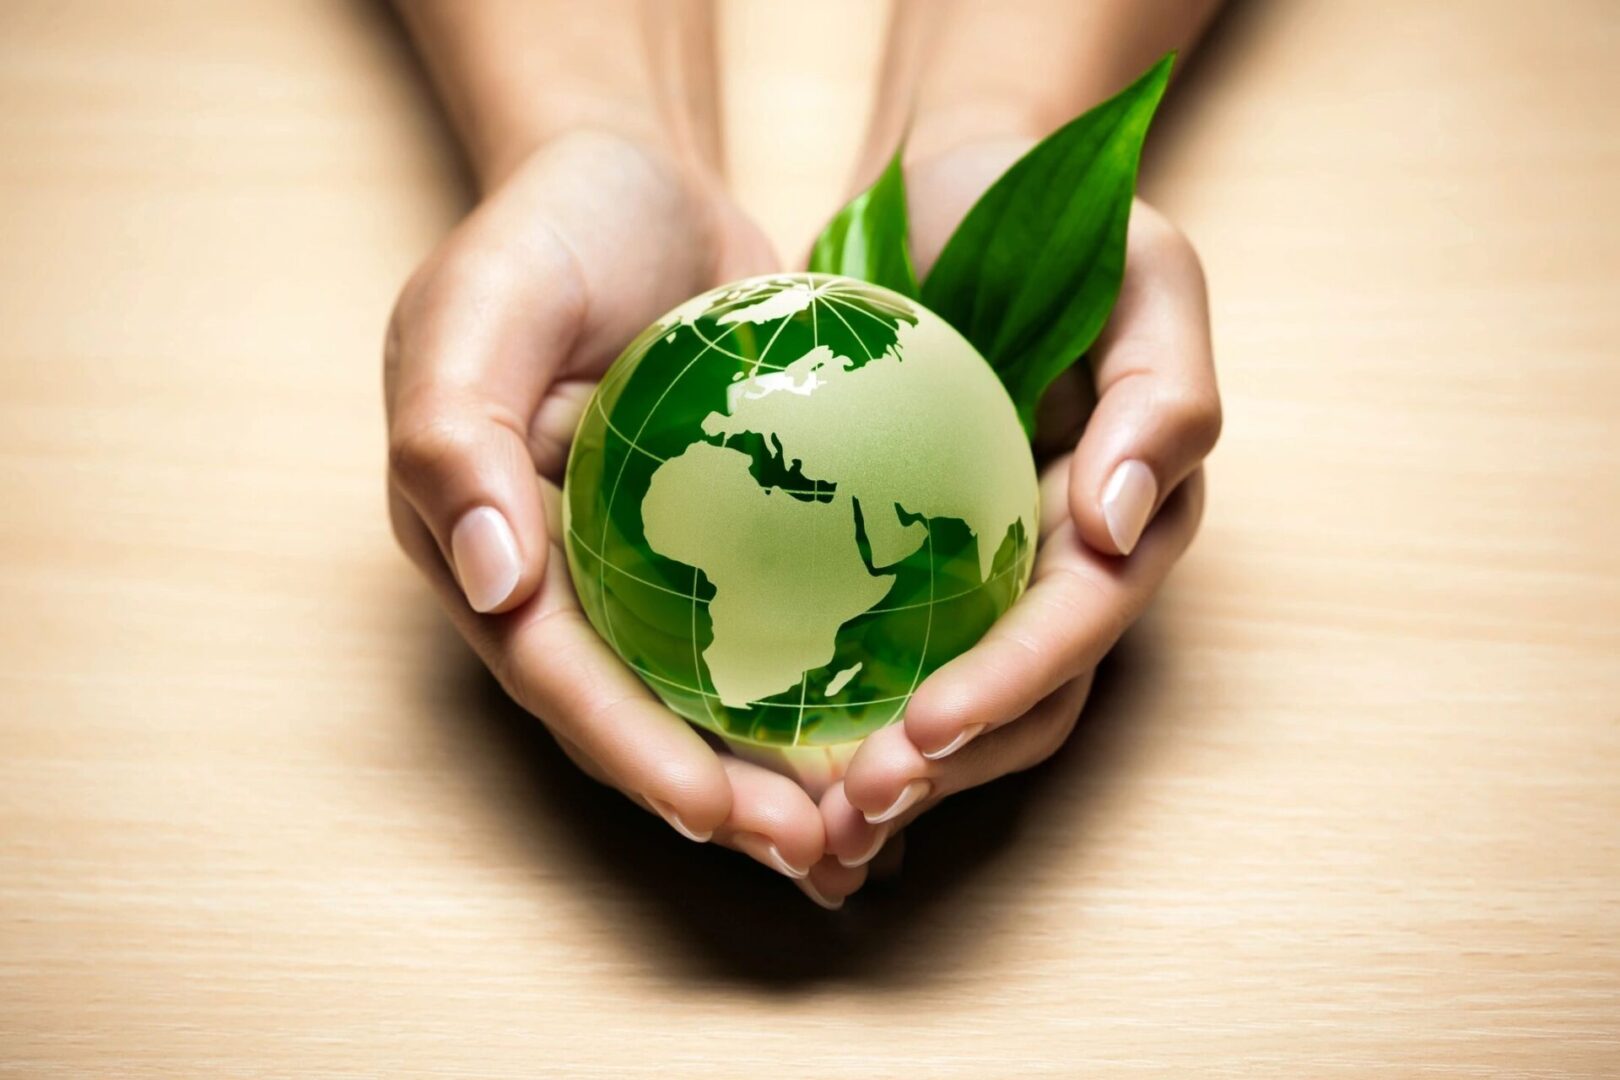 A person holding a green globe with leaves in their hands.